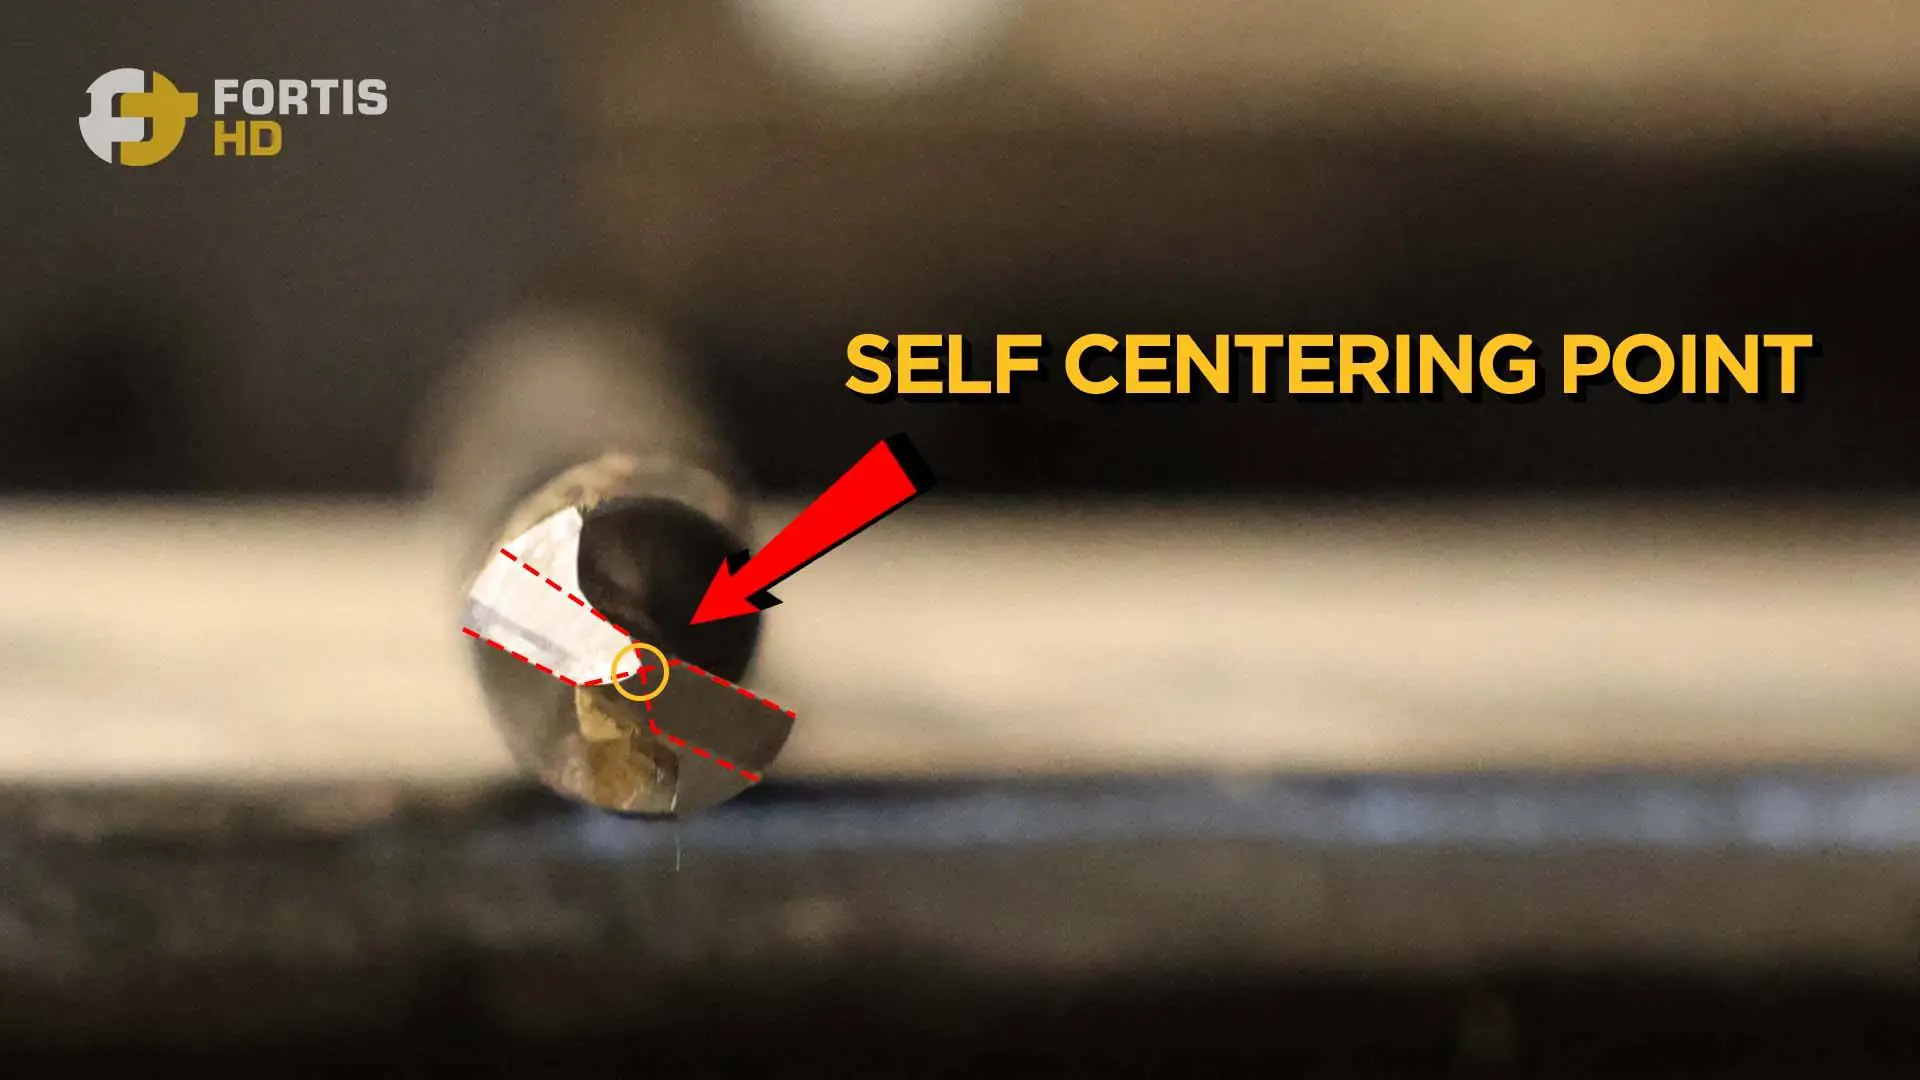 An arrow points at the self centering point of a Mueller Kueps carbide tip drill bit.